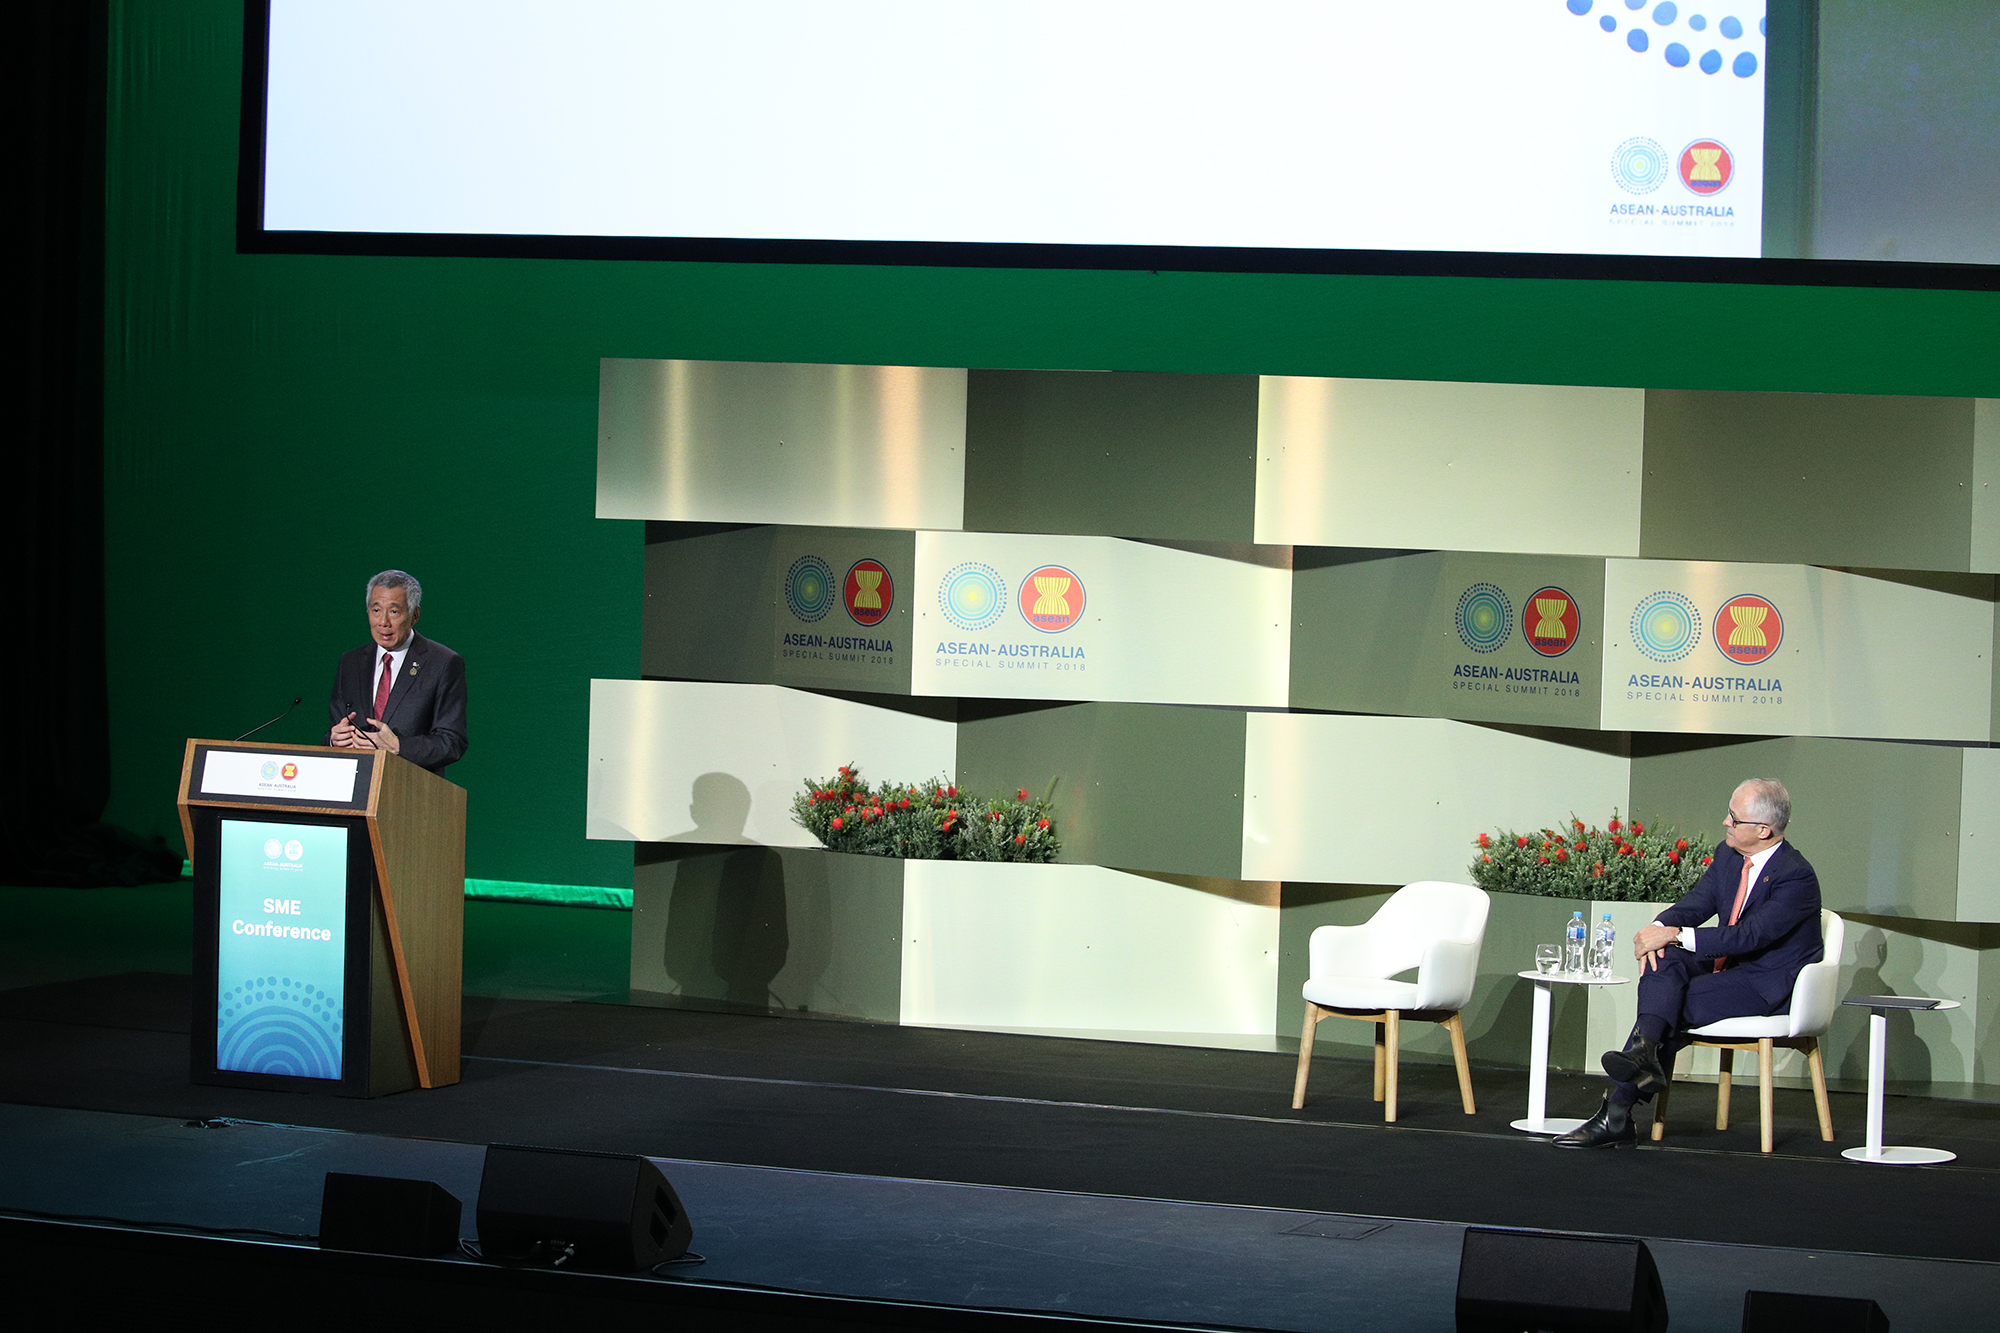 PM Lee delivering an opening speech at the Small and Medium Enterprise (SME) Conference of the ASEAN-Australia Business Summit in March 2018 (MCI Photo by Chwee)